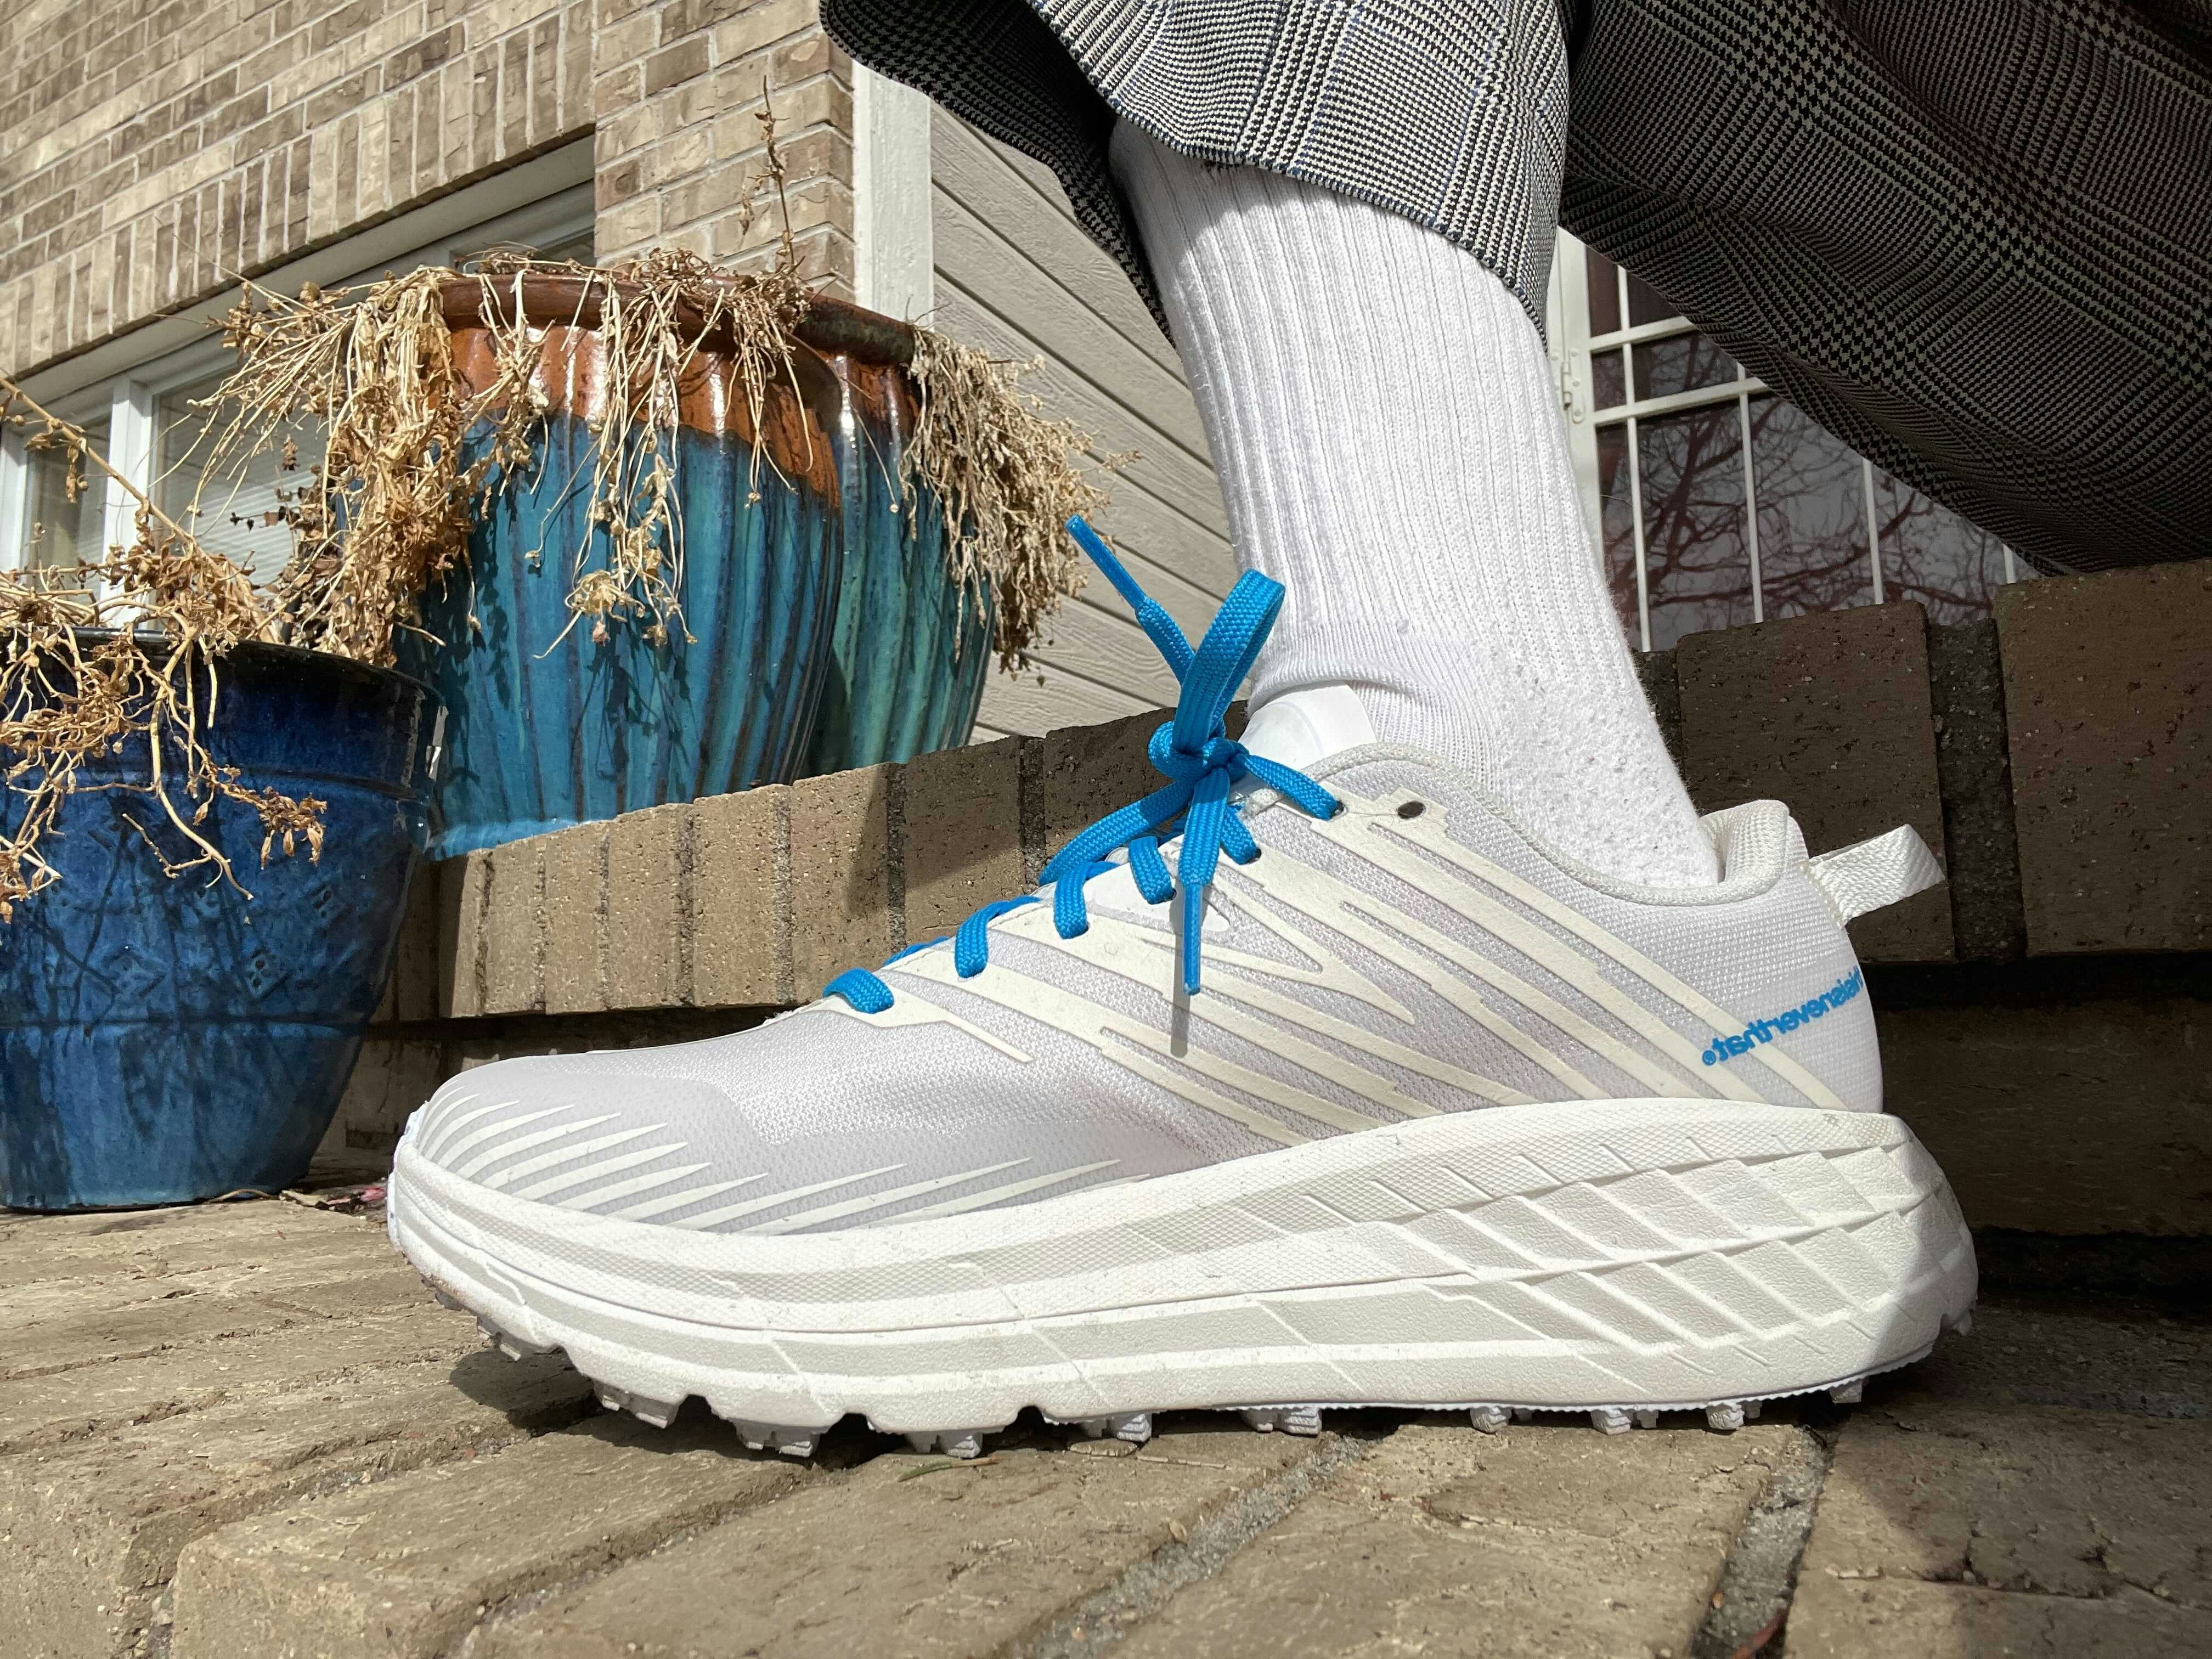 Wearing Hoka's 'Speedgoat 4': The most comfortable sneakers I own